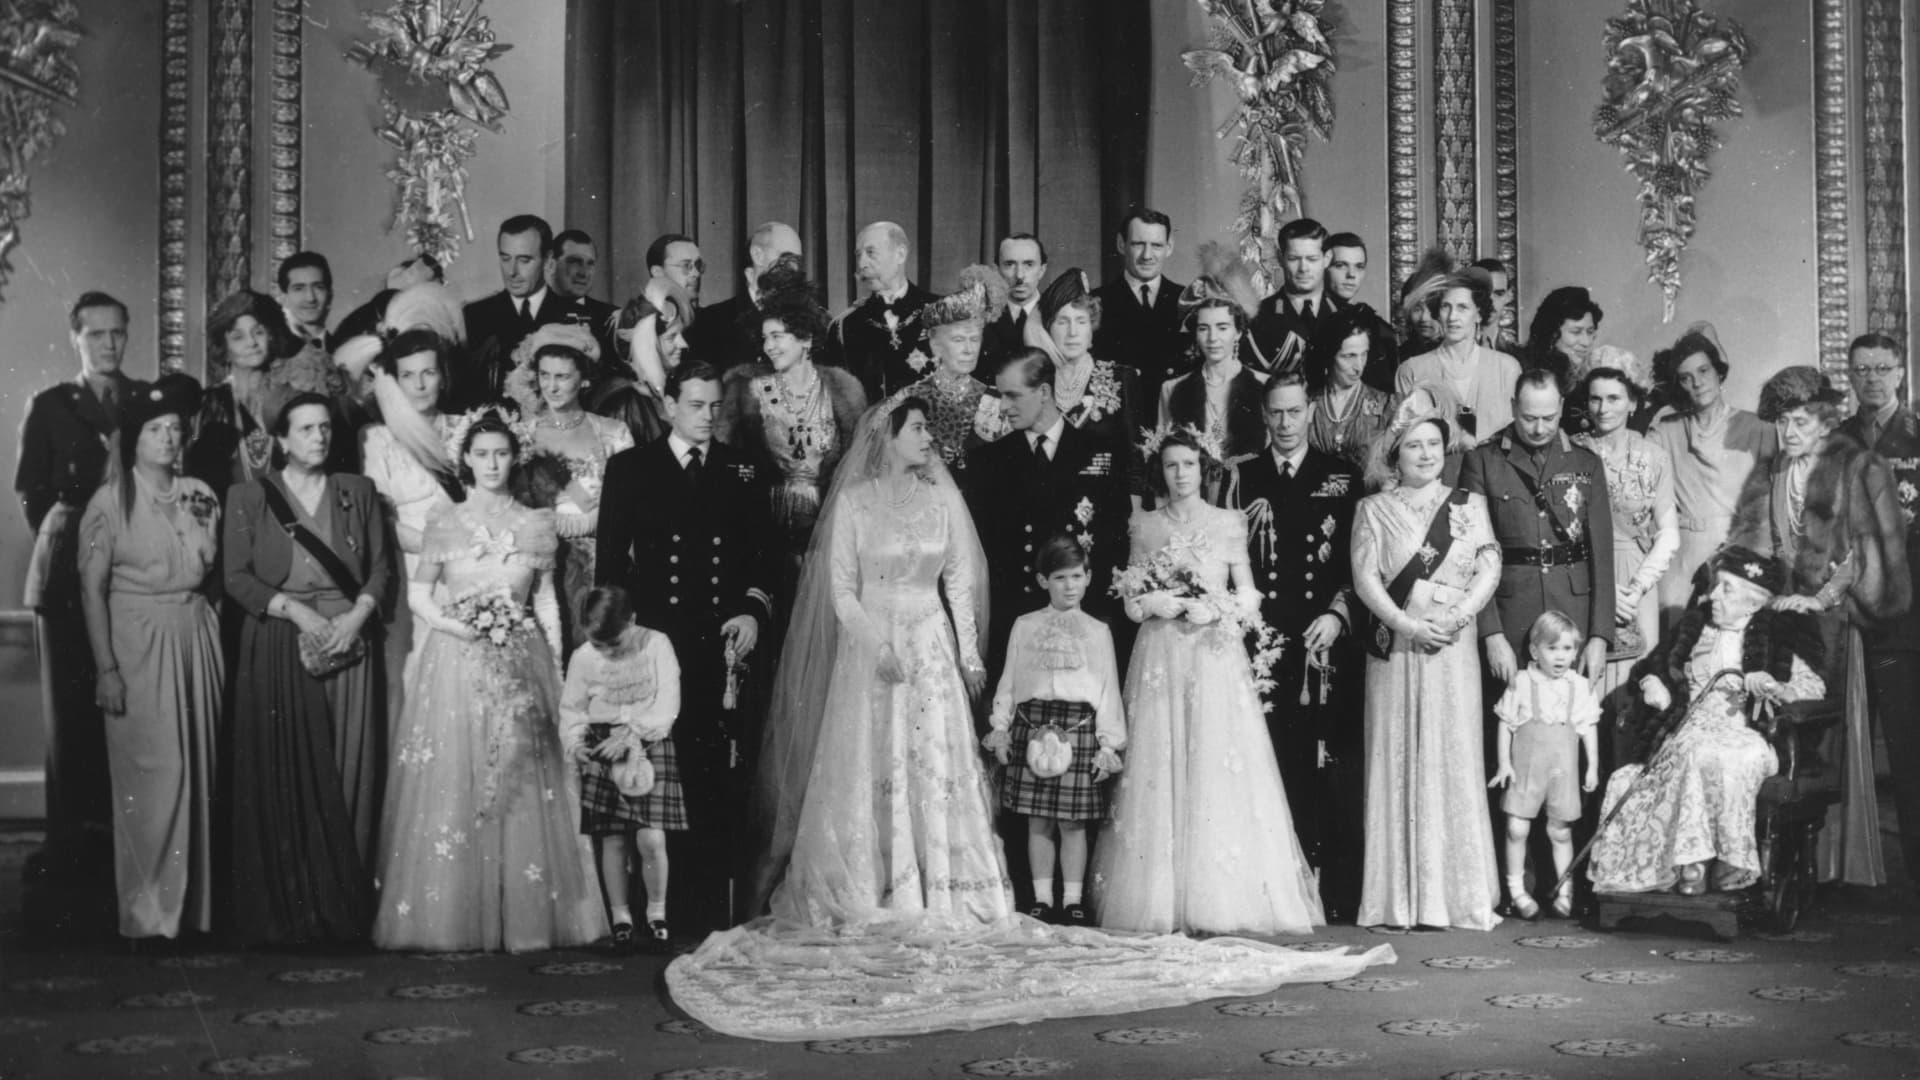 The royal family at the wedding of Princess Elizabeth and Prince Philip.